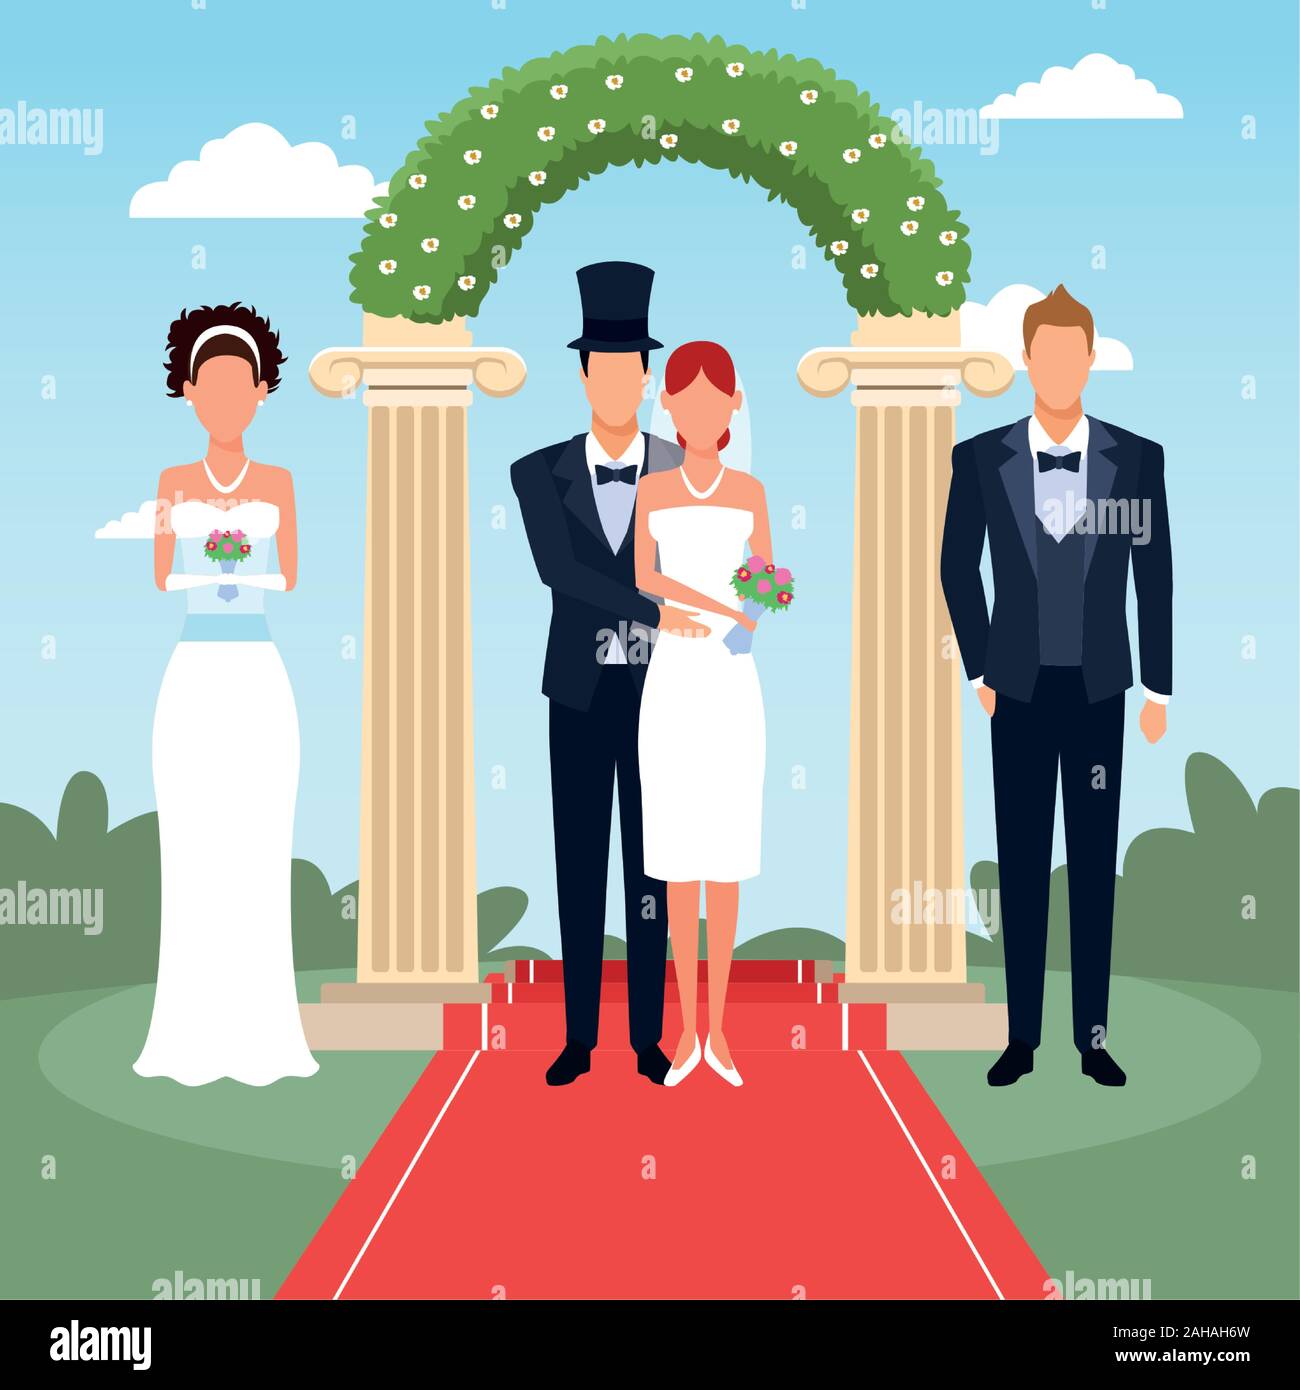 wedding couples standing over floral arch and landscape background, colorful design Stock Vector